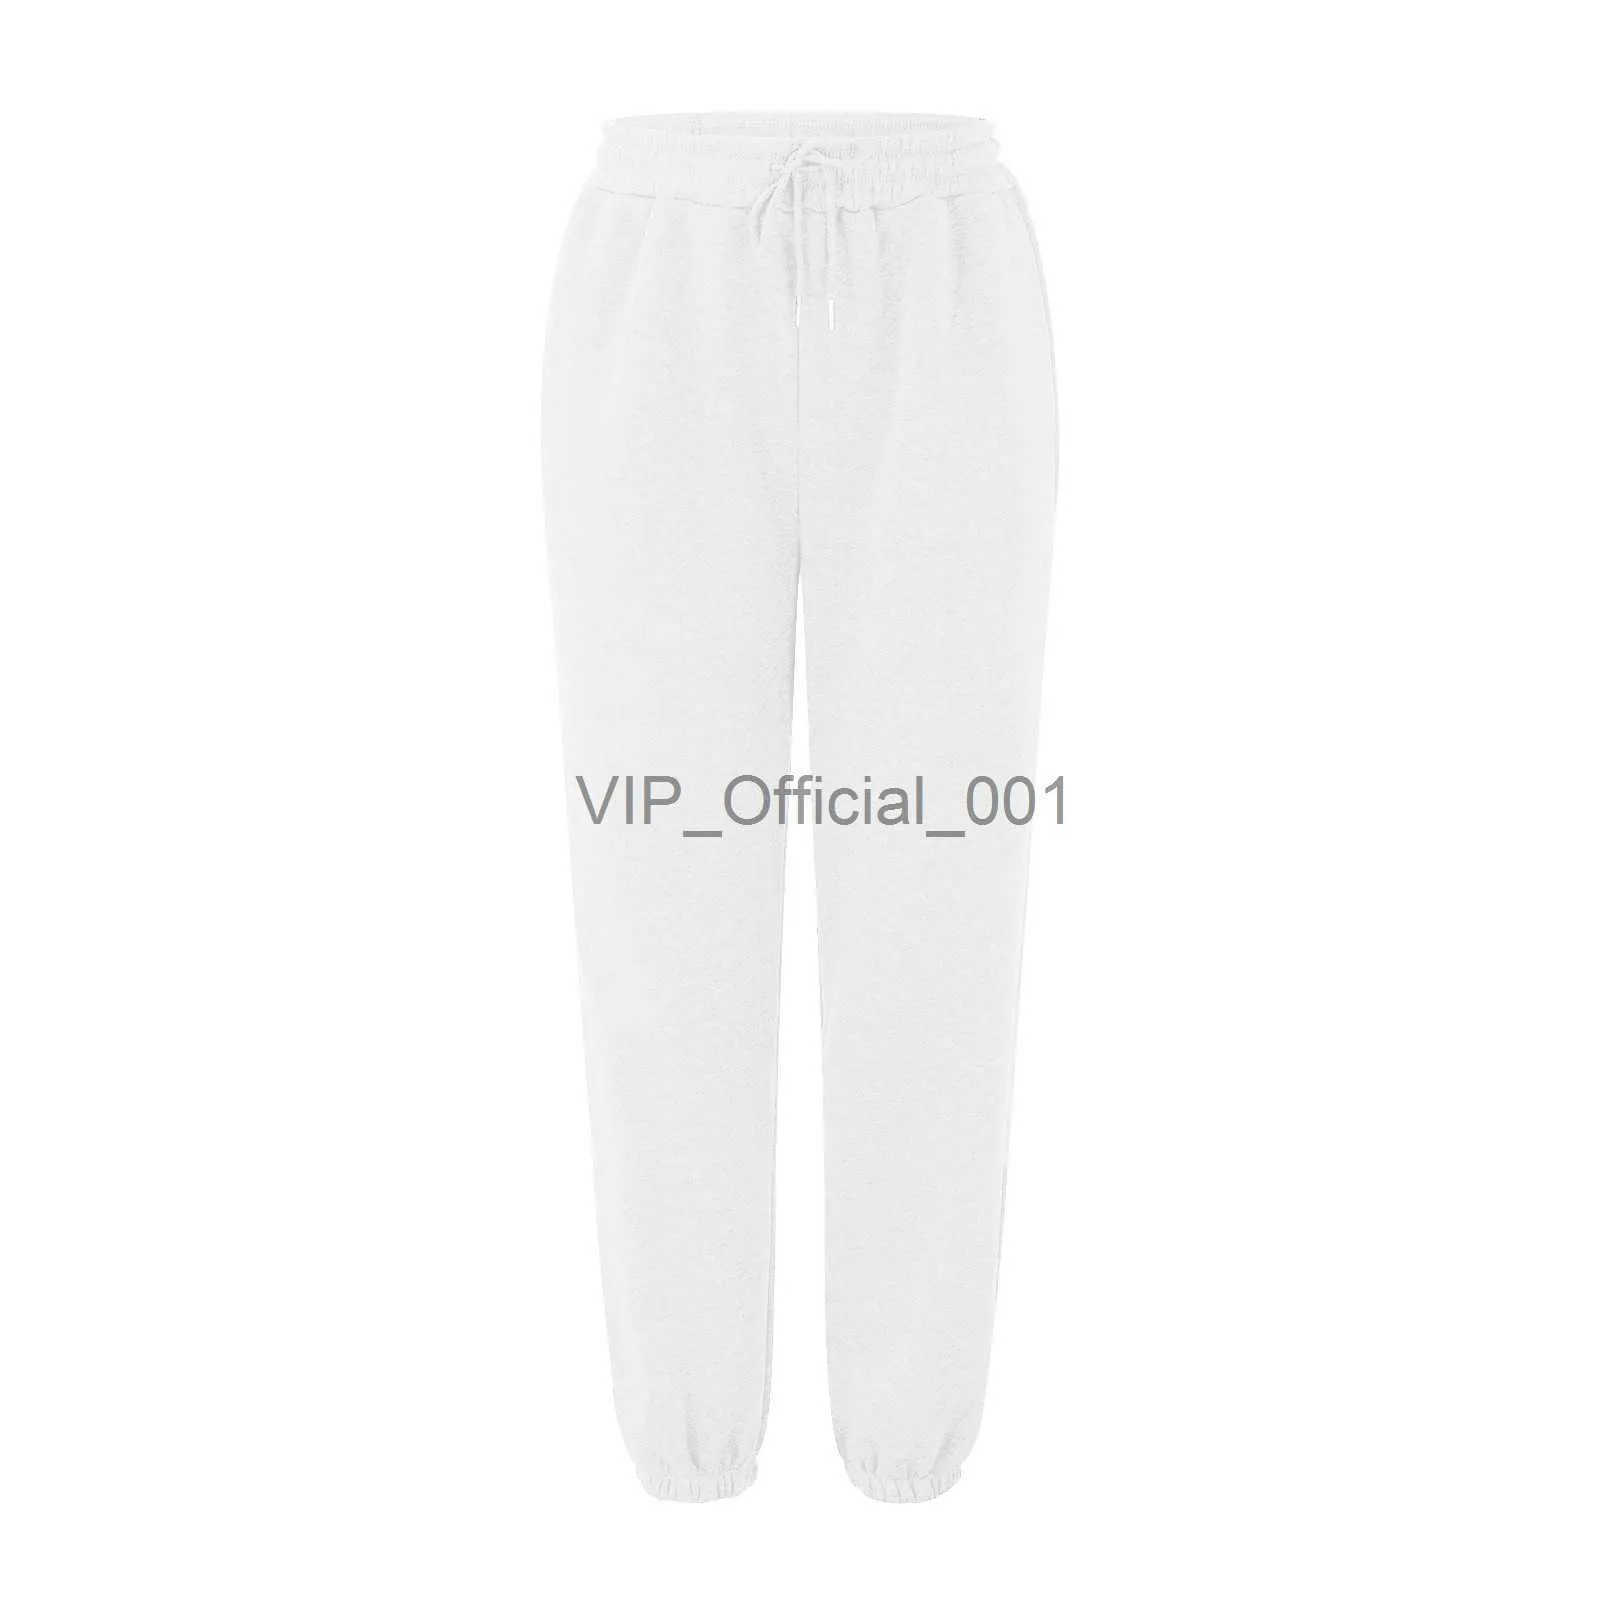 High Waisted Cargo Pants With Pockets For Women Perfect For Yoga, Workouts,  And Jogging Plus Size Available Style X0831 From Vip_official_001, $14.14